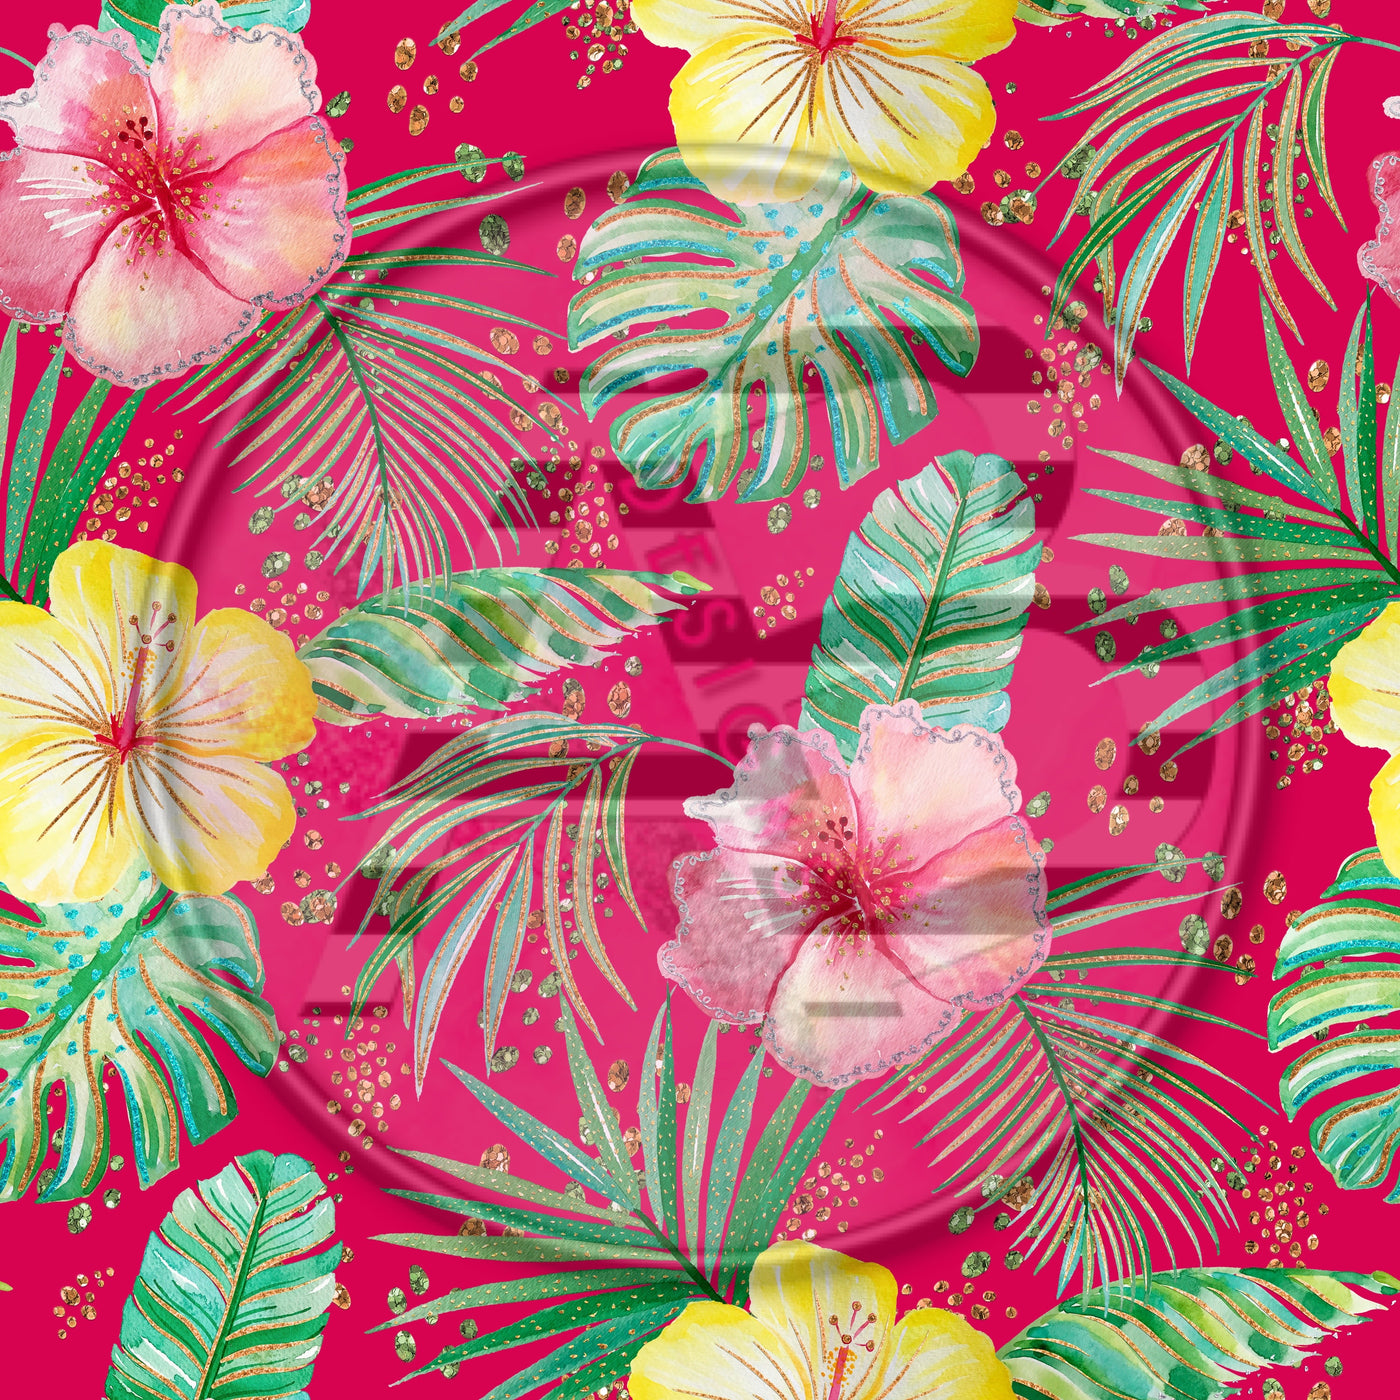 Adhesive Patterned Vinyl - Tropical 715